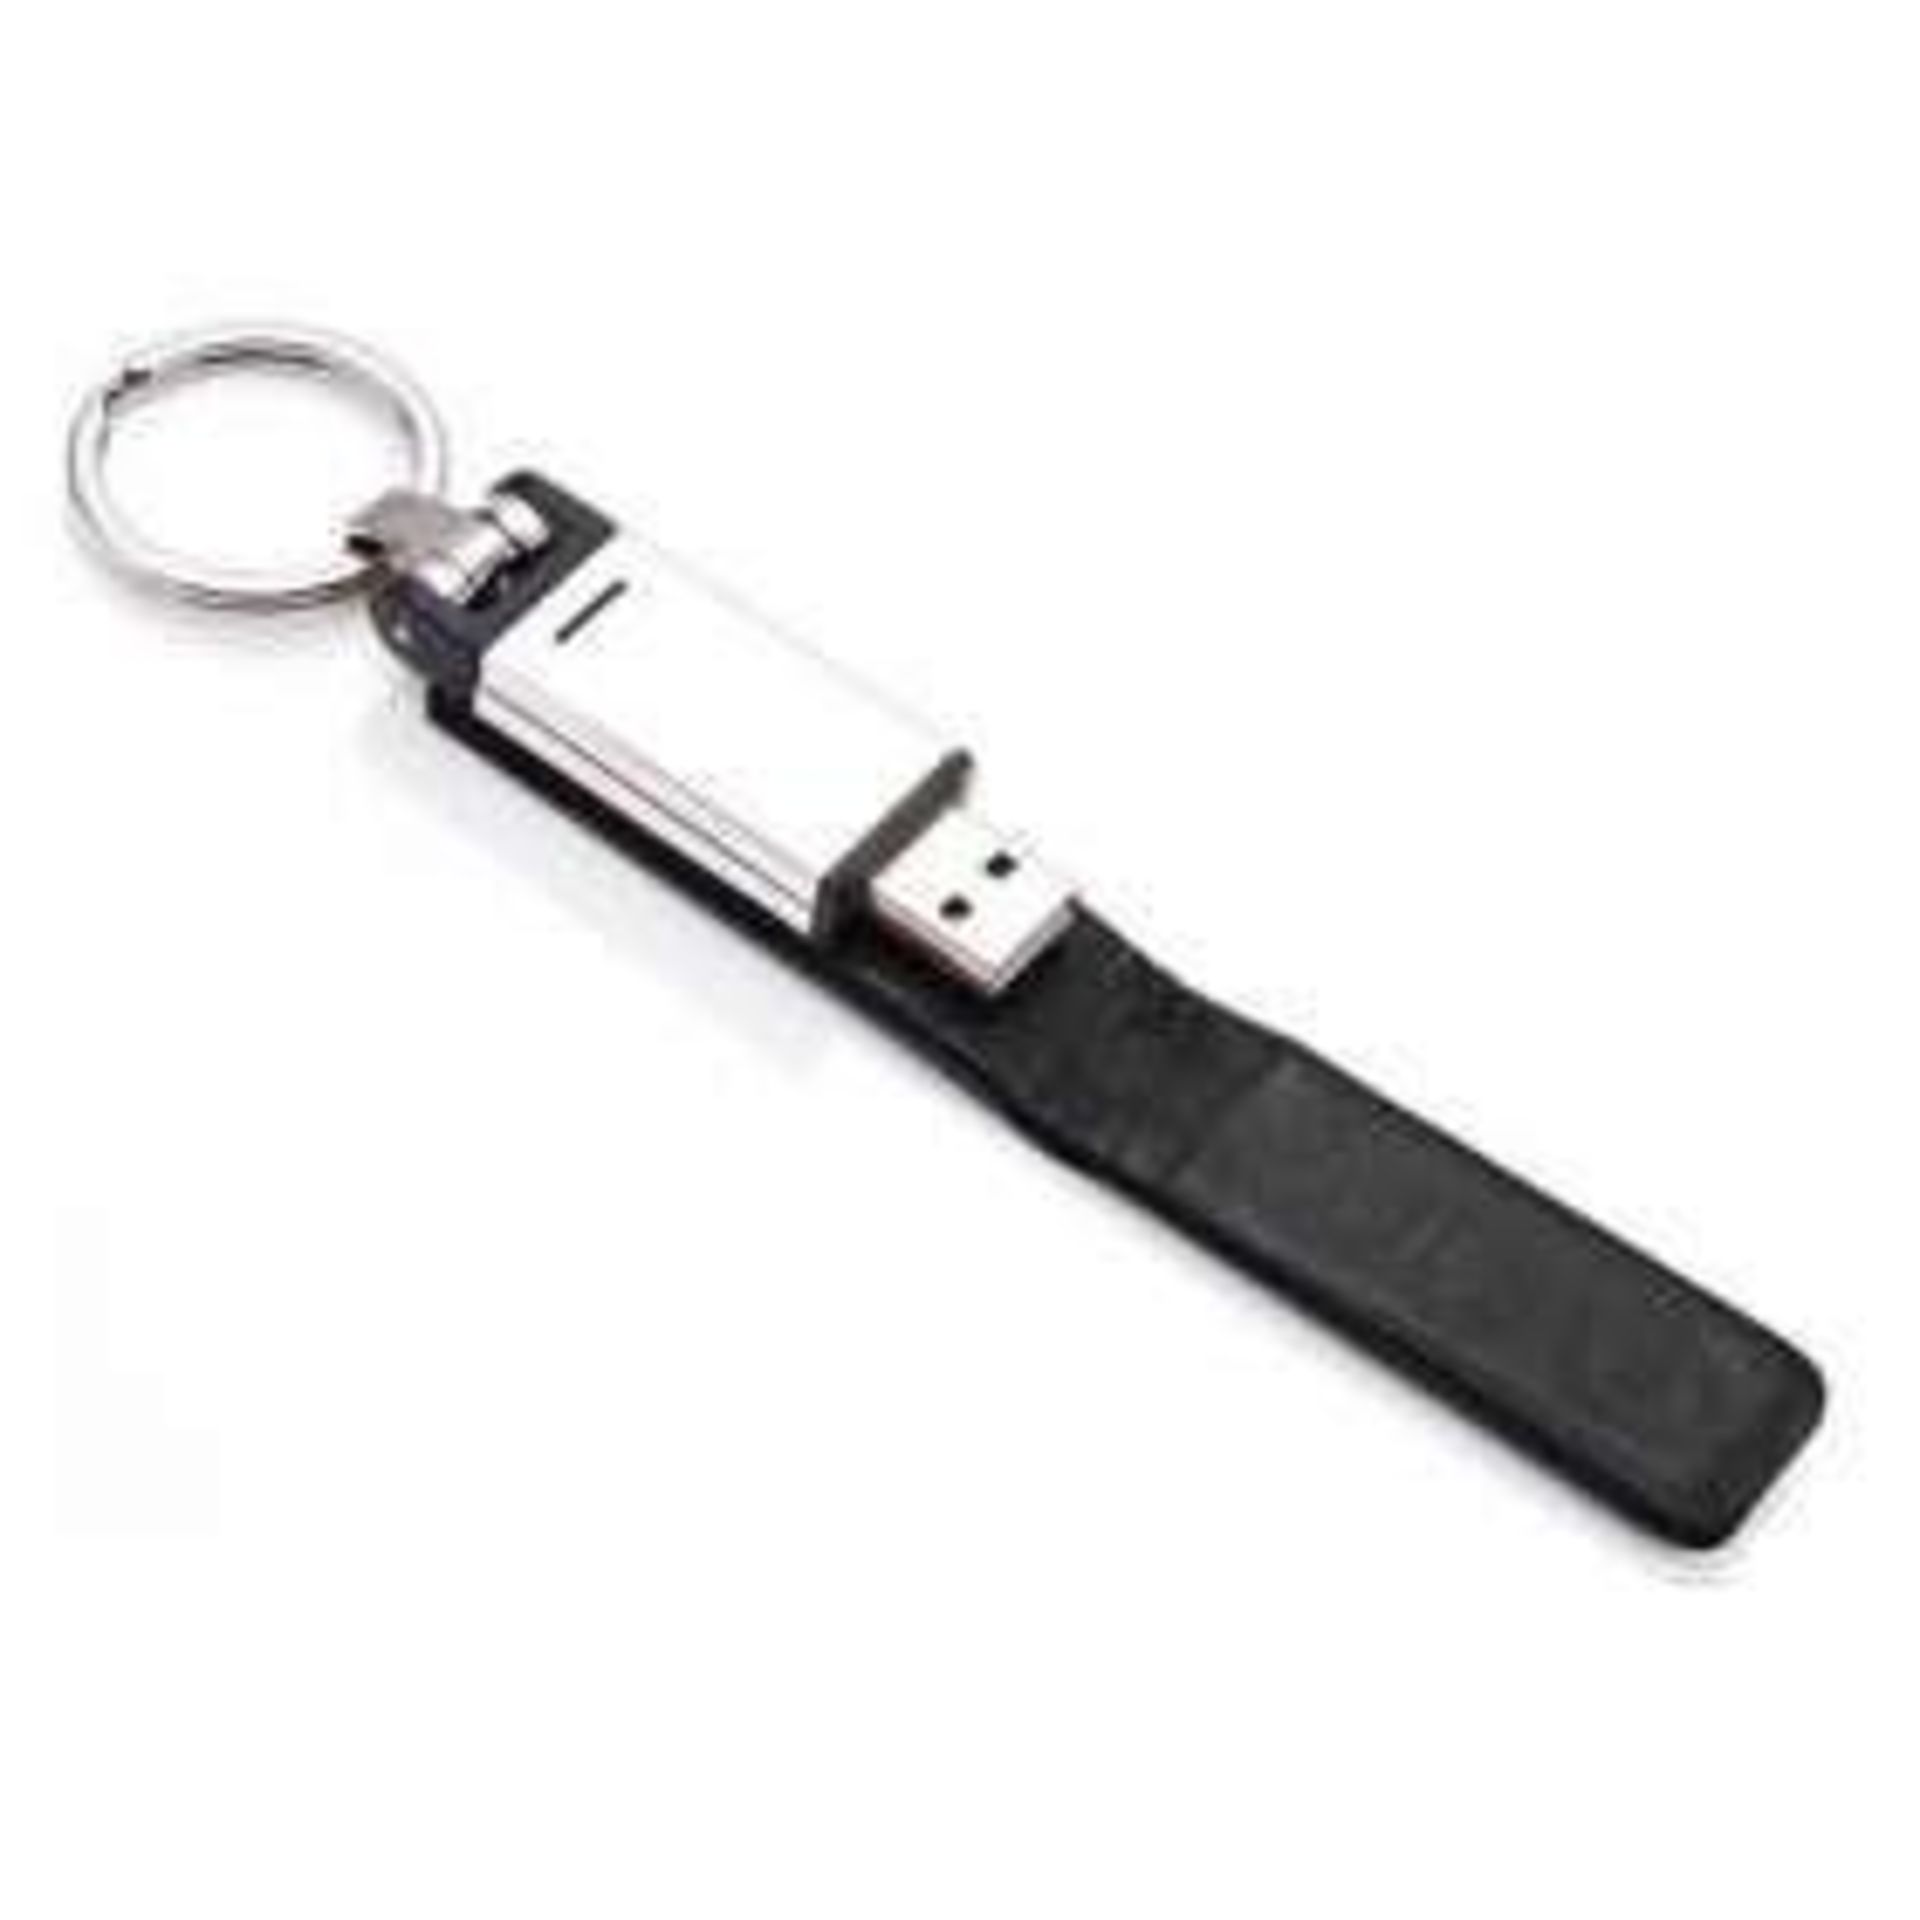 1 x ICE London Silver Plated 2GB USB Flashdrive Keyring - Features A Genuine Leather Wrap With - Image 2 of 6